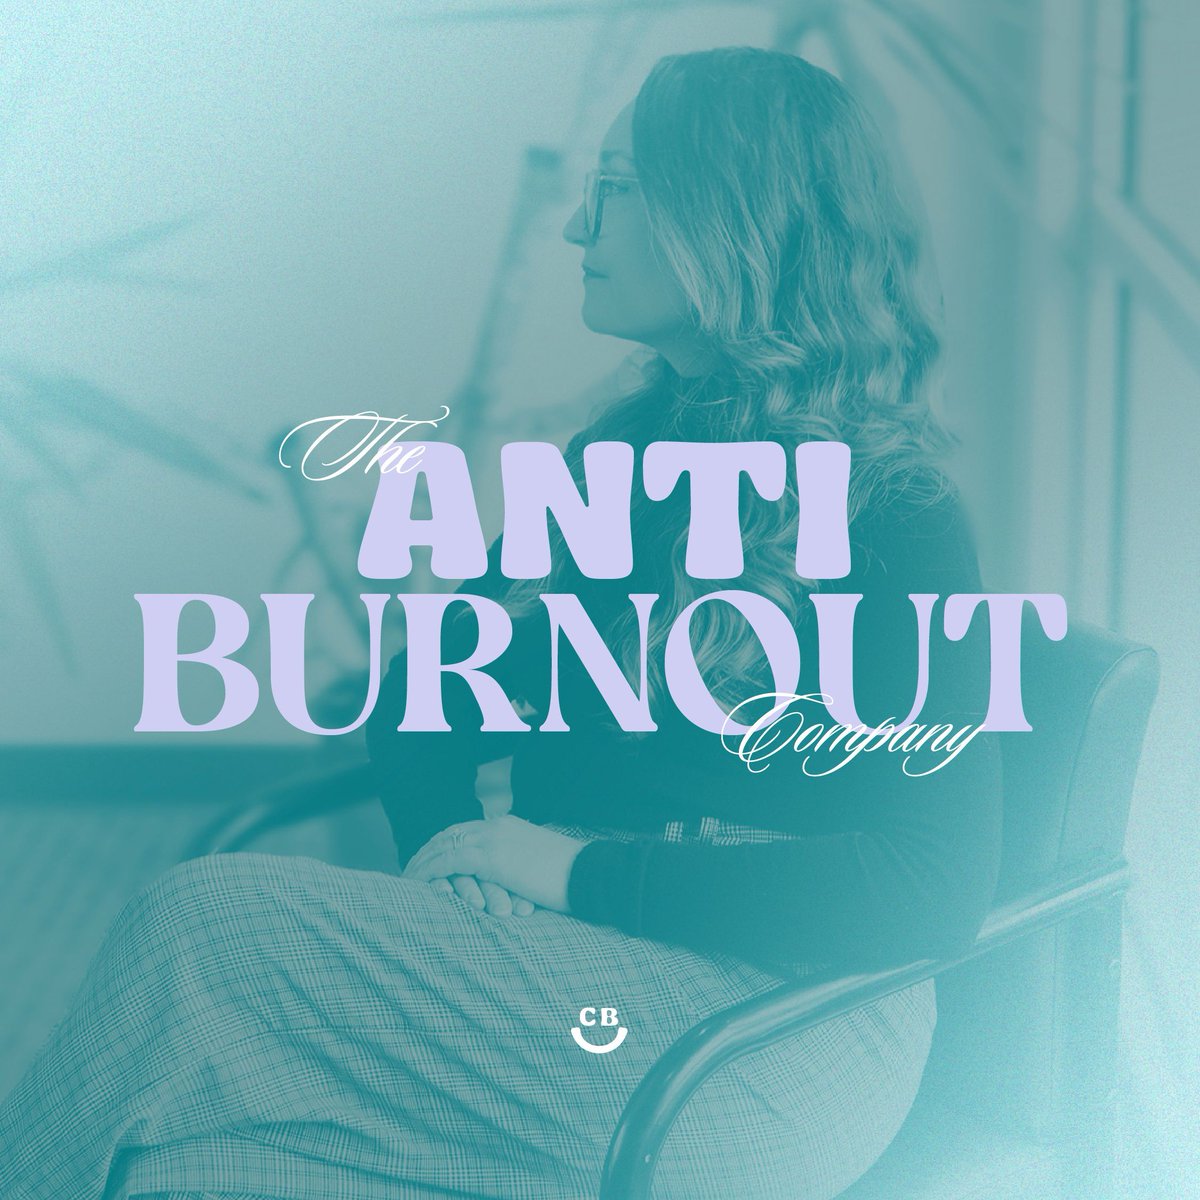 Allow us to re-introduce ourselves 👋🏽

We're the Anti-Burnout Company! 💙 Satisfied clients require healthy employees, who rely on empowered leaders. And that's where we come in! No matter how long you've been in the business, you deserve a little more support. #cliniciansupport